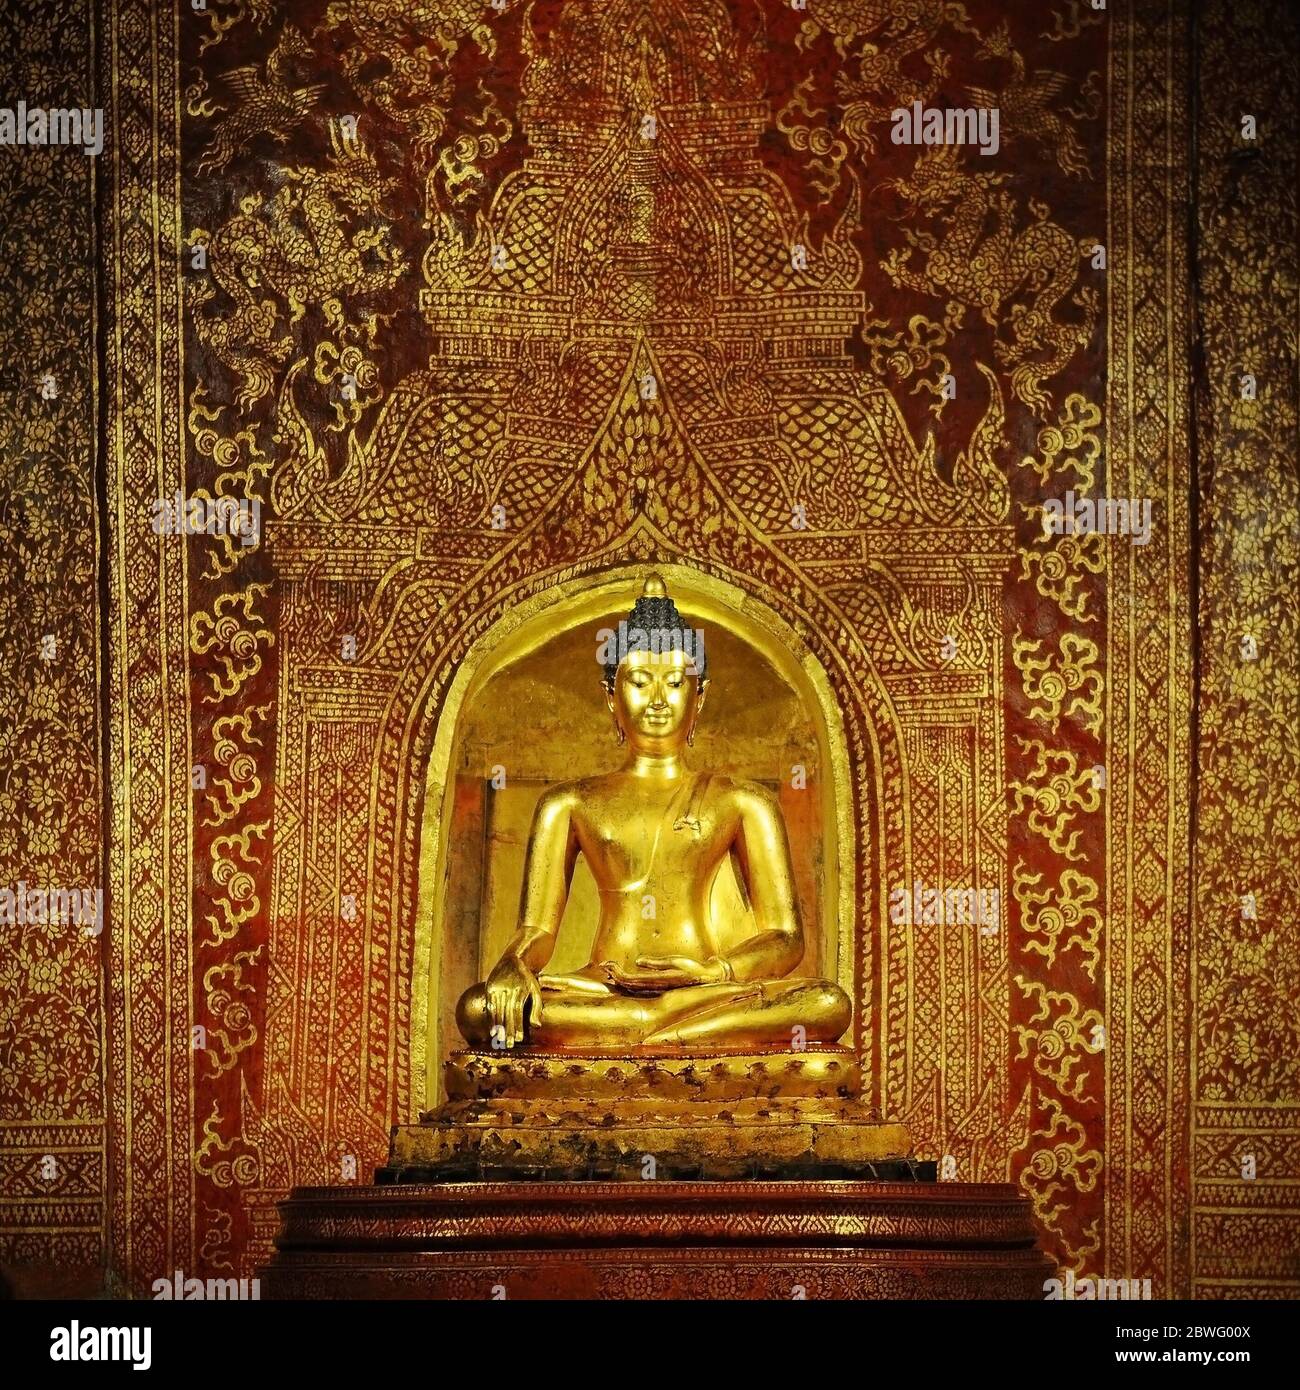 The Phra Buddha Sing Statue in the Wat Phra Sing temple, the most important buddha of Chiang Mai. Stock Photo